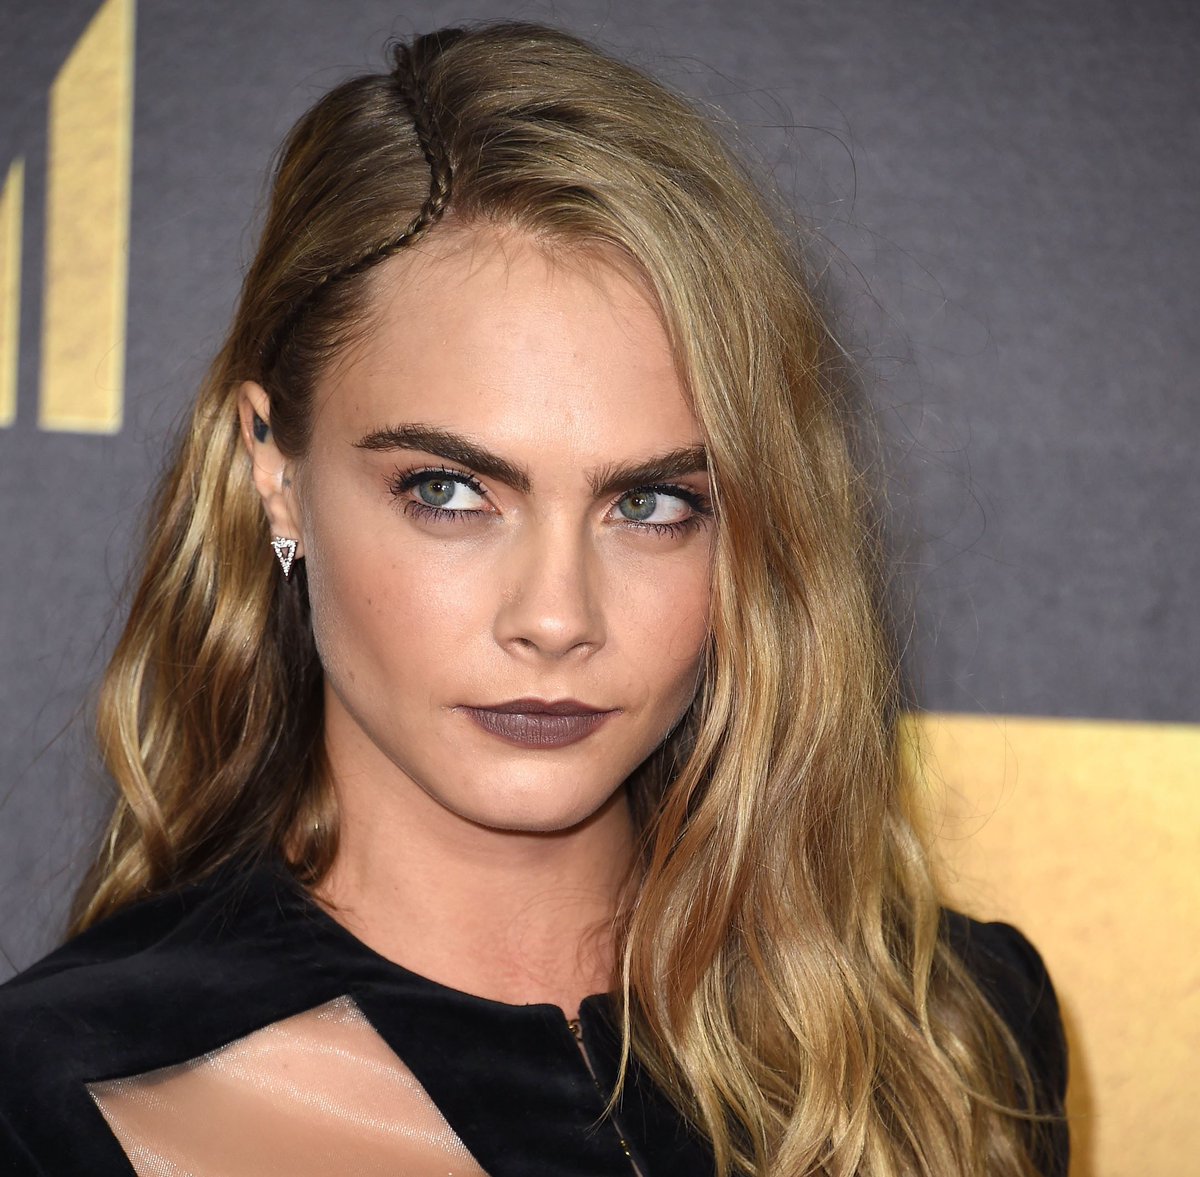 The one thing you never knew about Cara Delevingne becoming a model ...